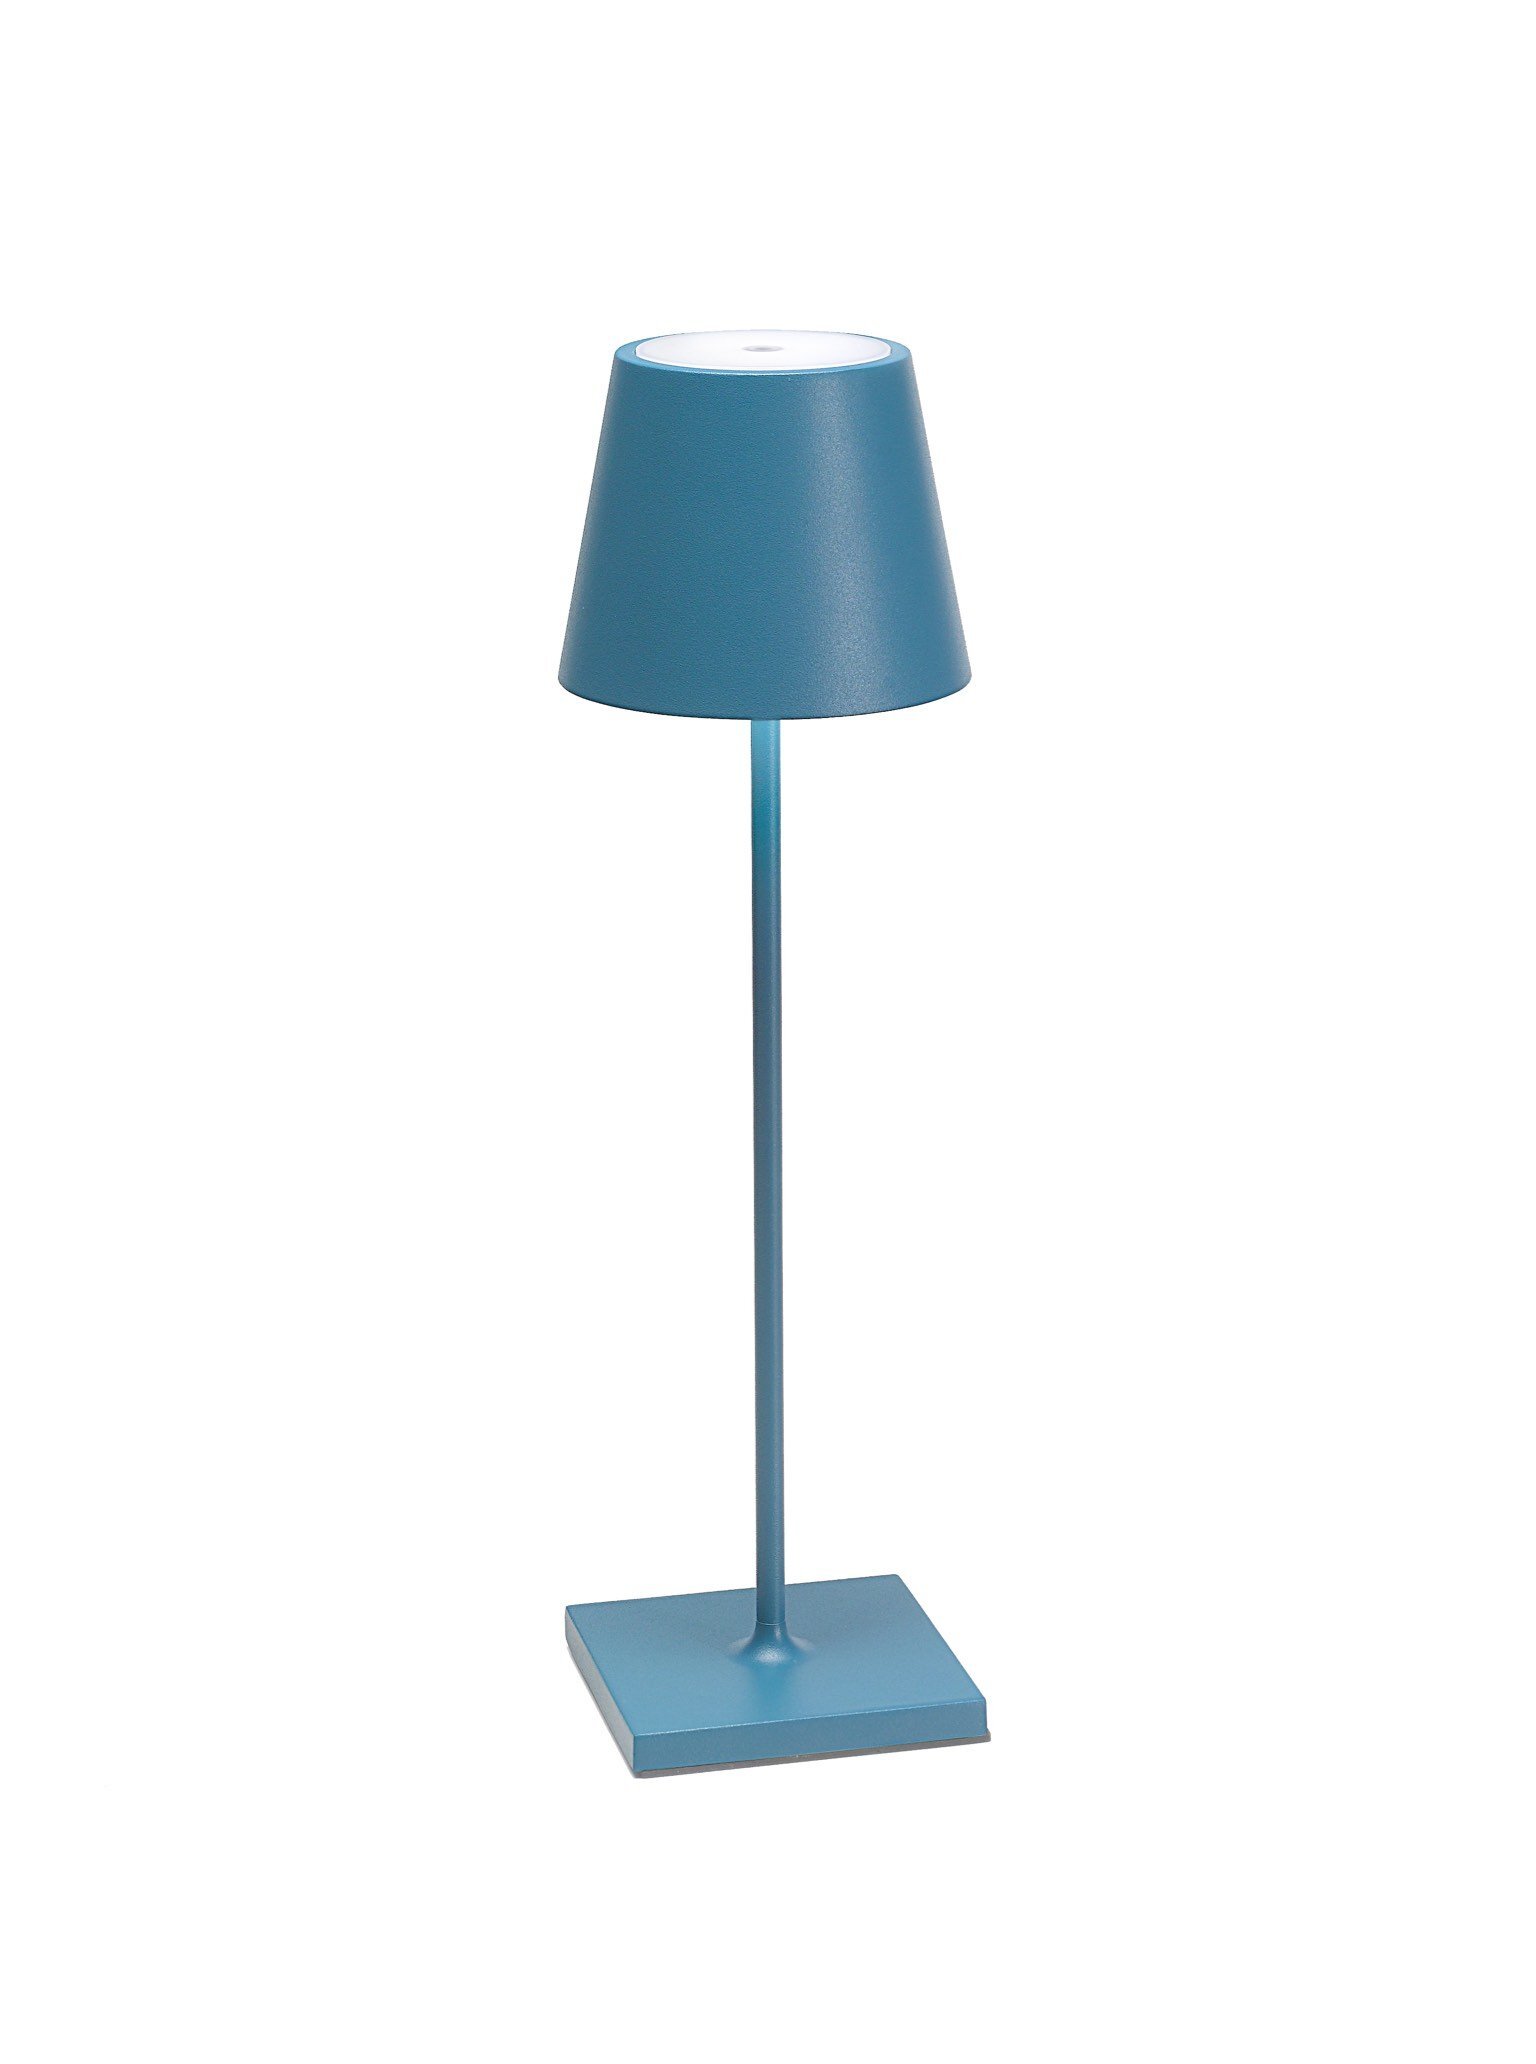 Marders Indoor Outdoor Table Lamp A, Bed Bath And Beyond Cordless Table Lamps